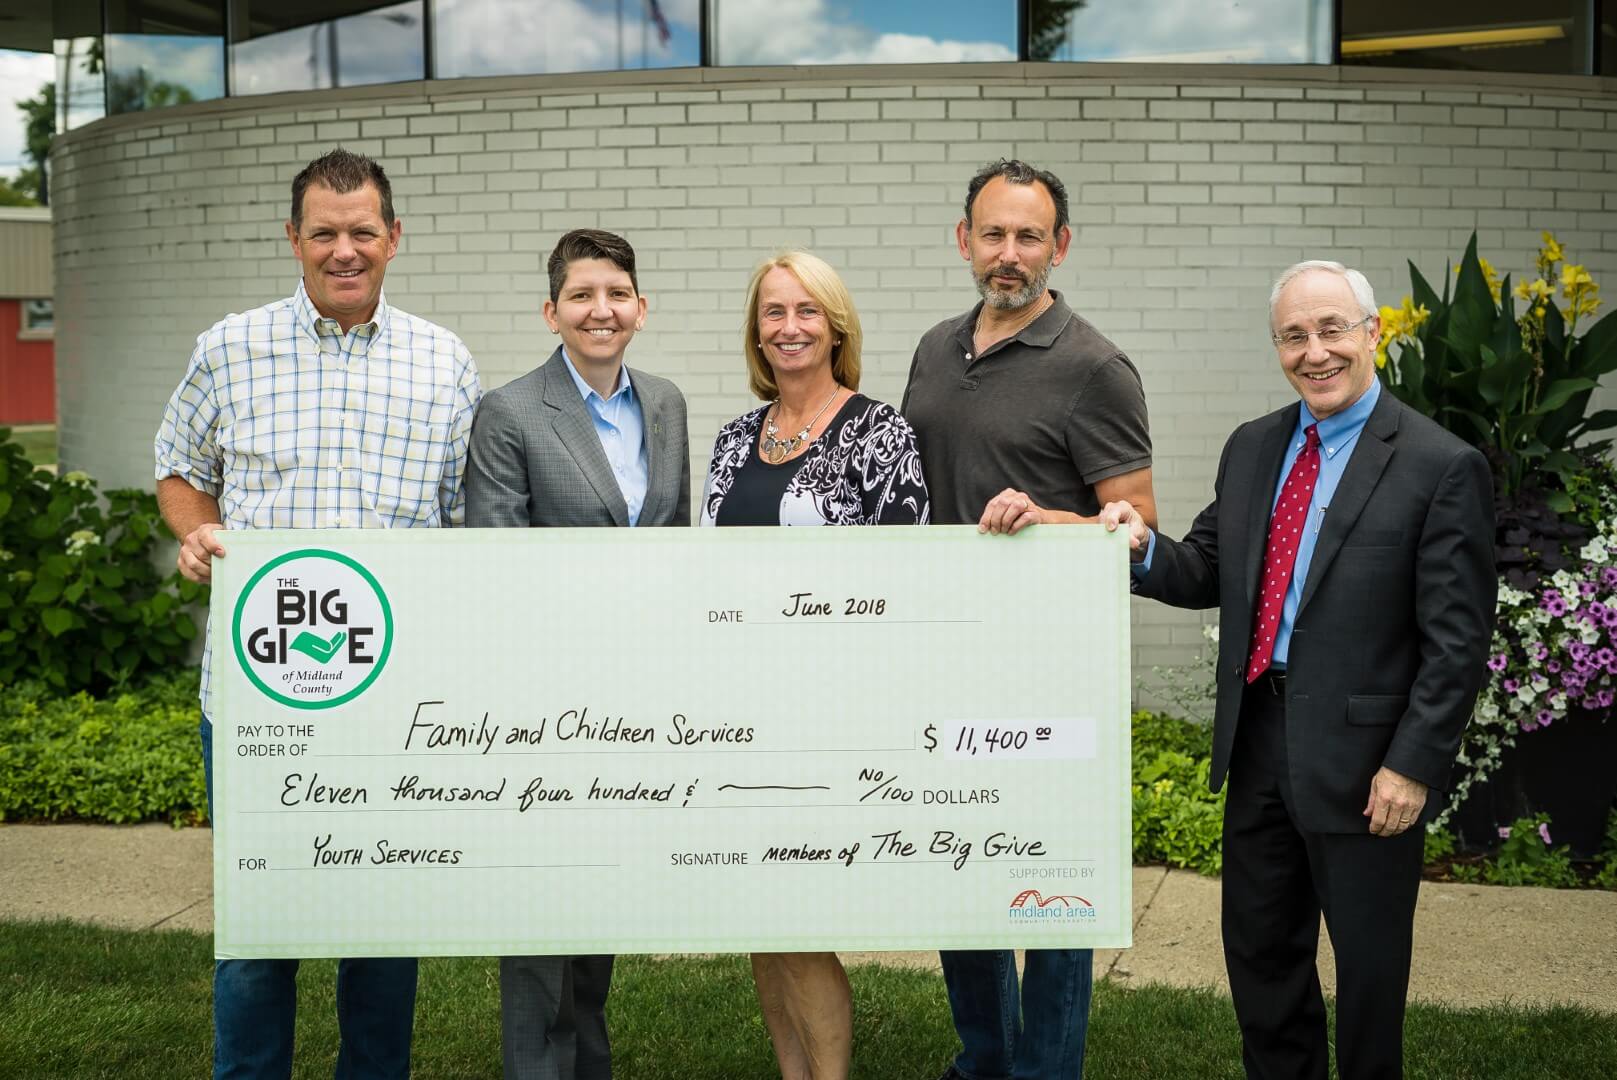 Members of The Big Give hand a giant check to Family and Children's Services